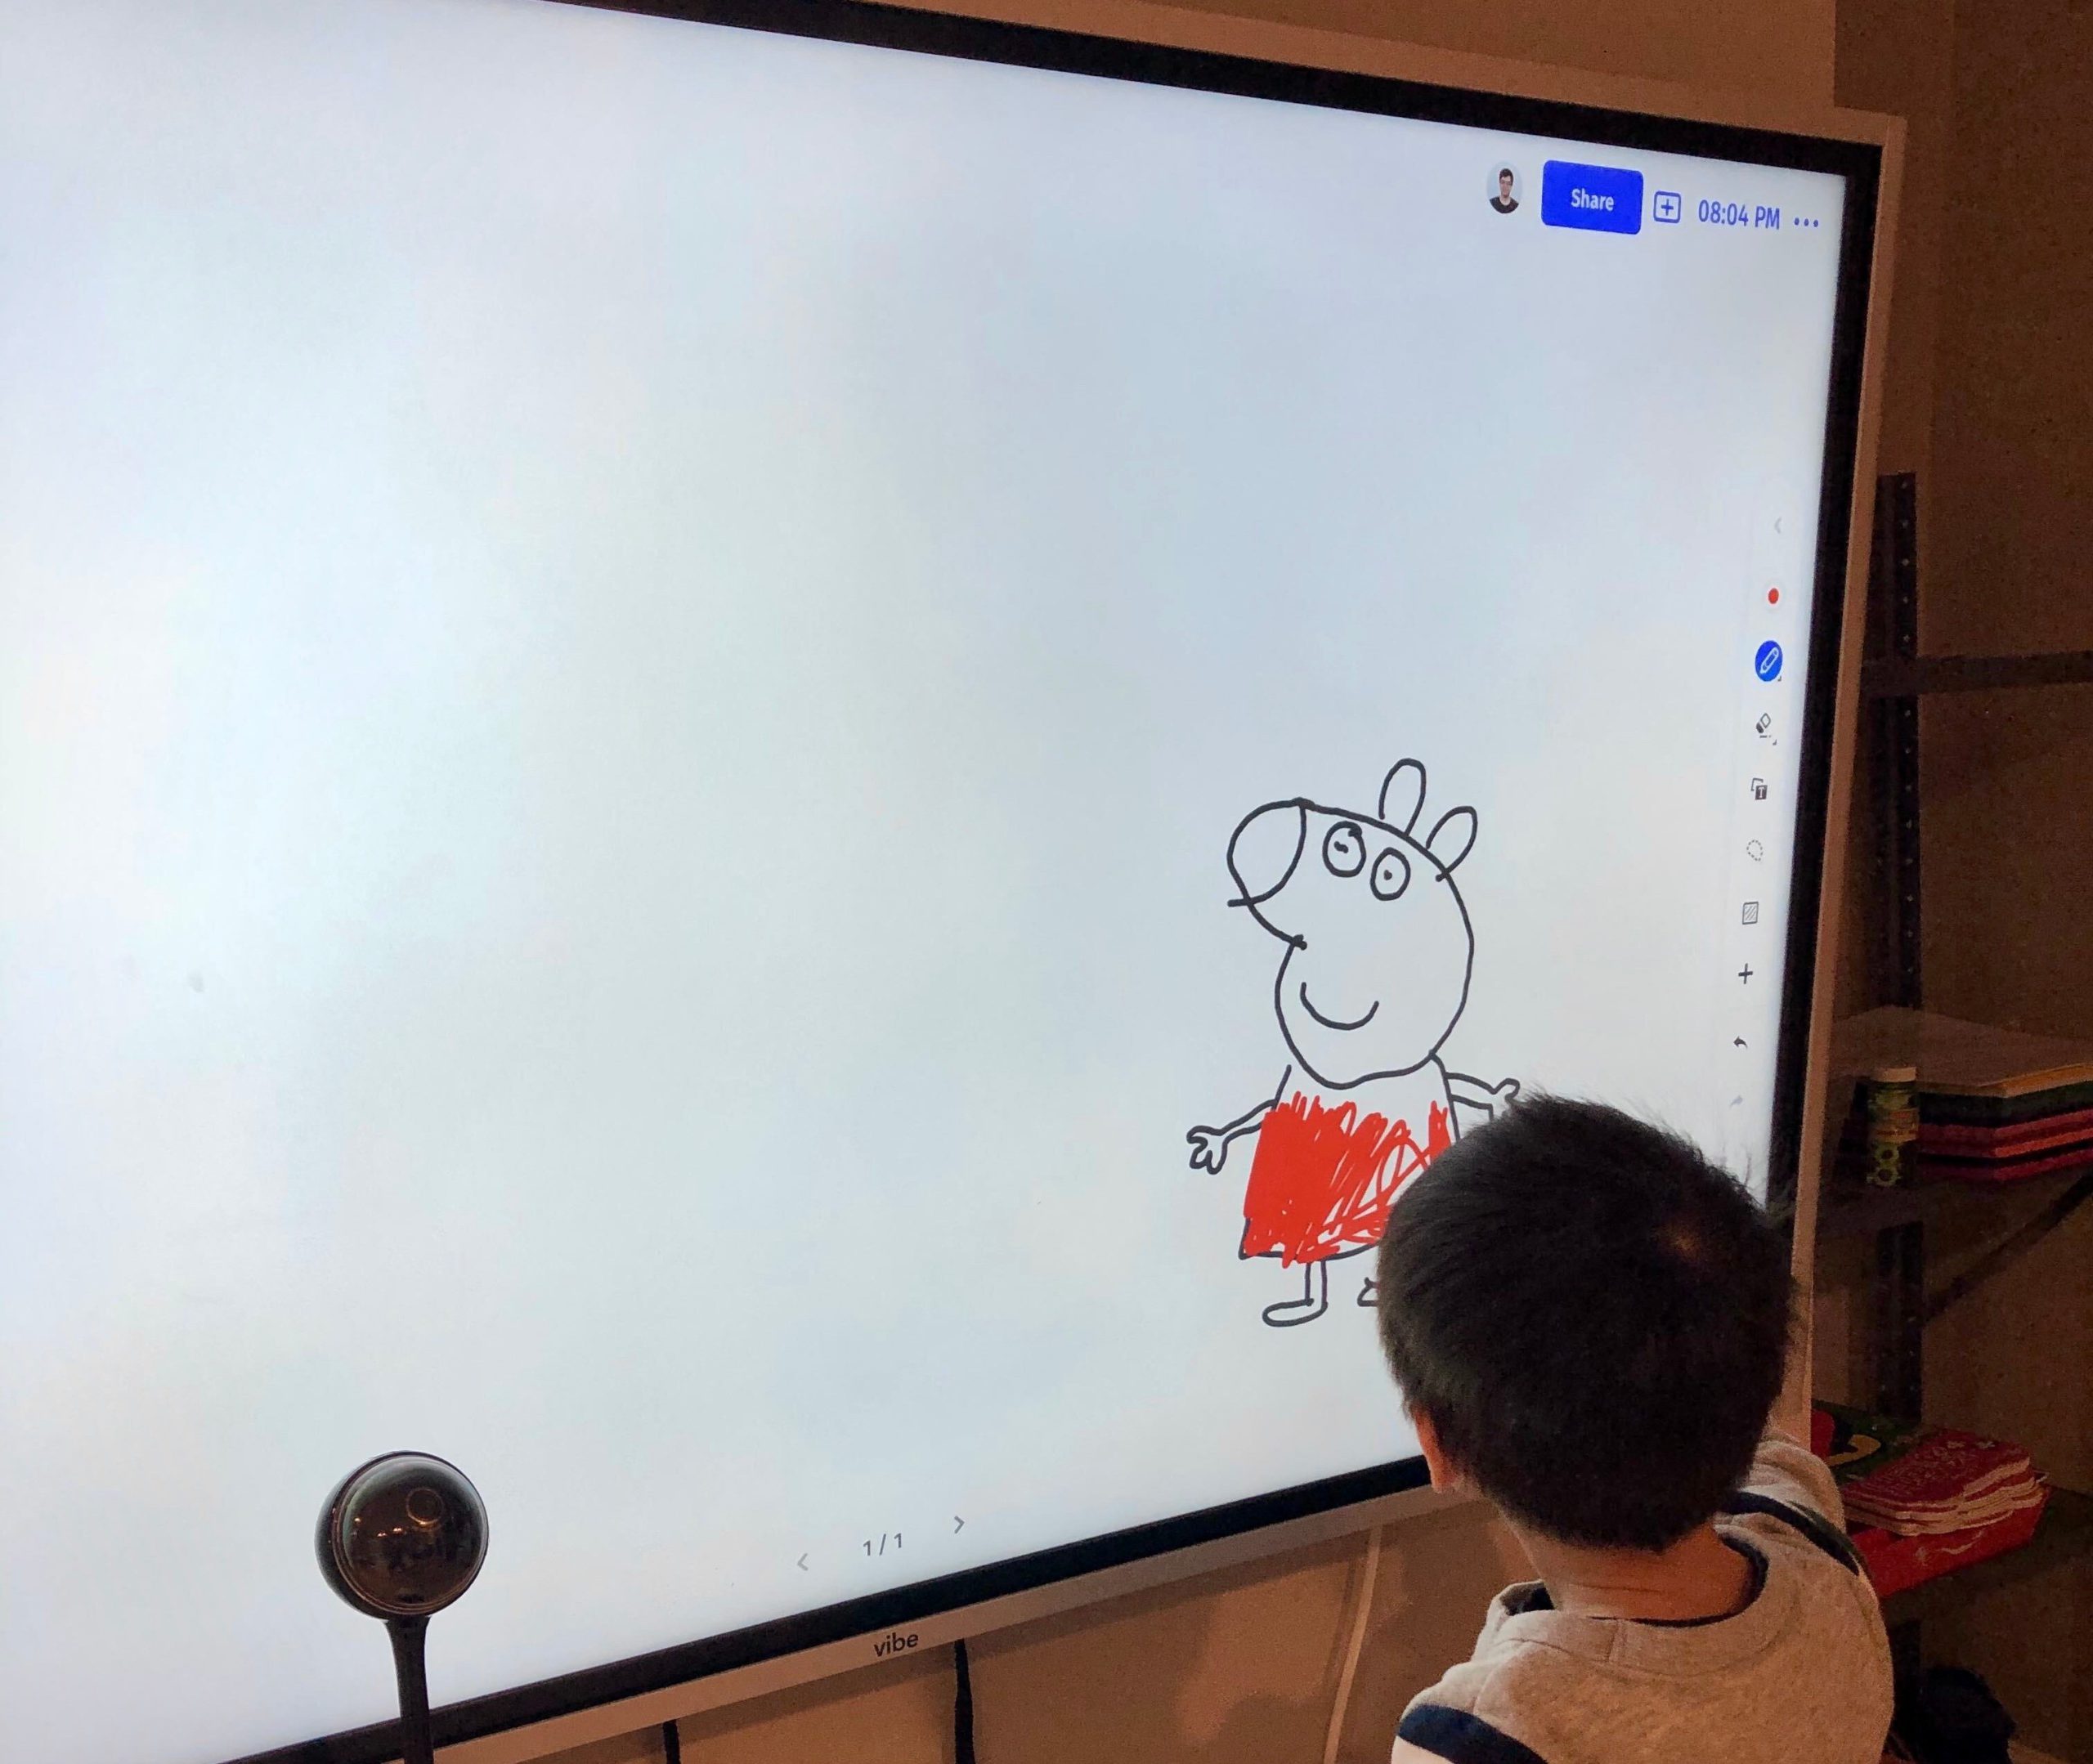 Using the whiteboard app on the Vibe board